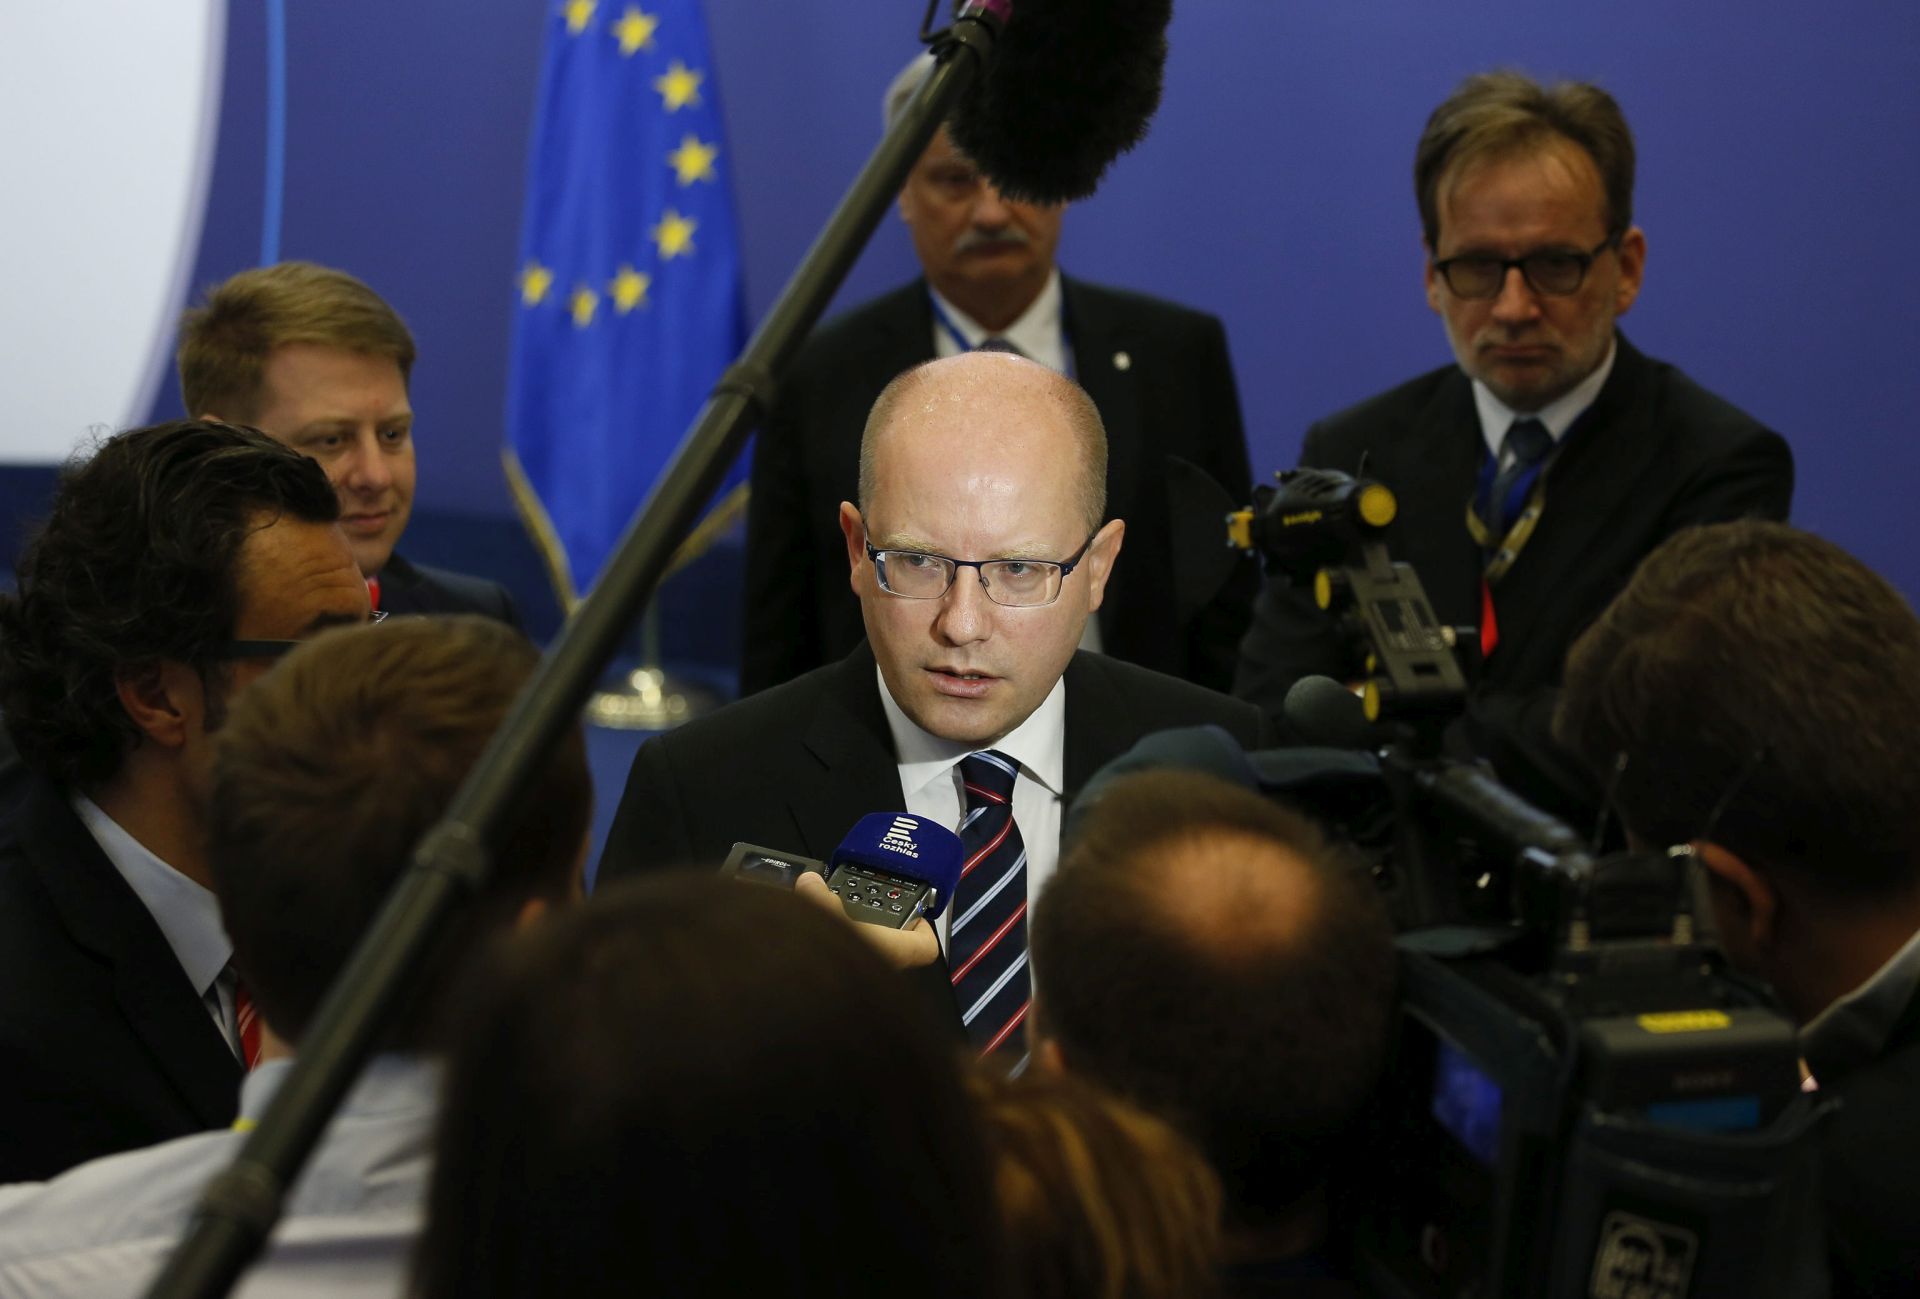 epa05395770 Prime Minister of the Czech Republic,  Bohuslav Sobotka, talks to media after a bilateral meeting with European Council President Donald Tusk (not pictured) ahead of the European Summit in Brussels, Belgium, 28 June 2016.  EPA/JULIEN WARNAND